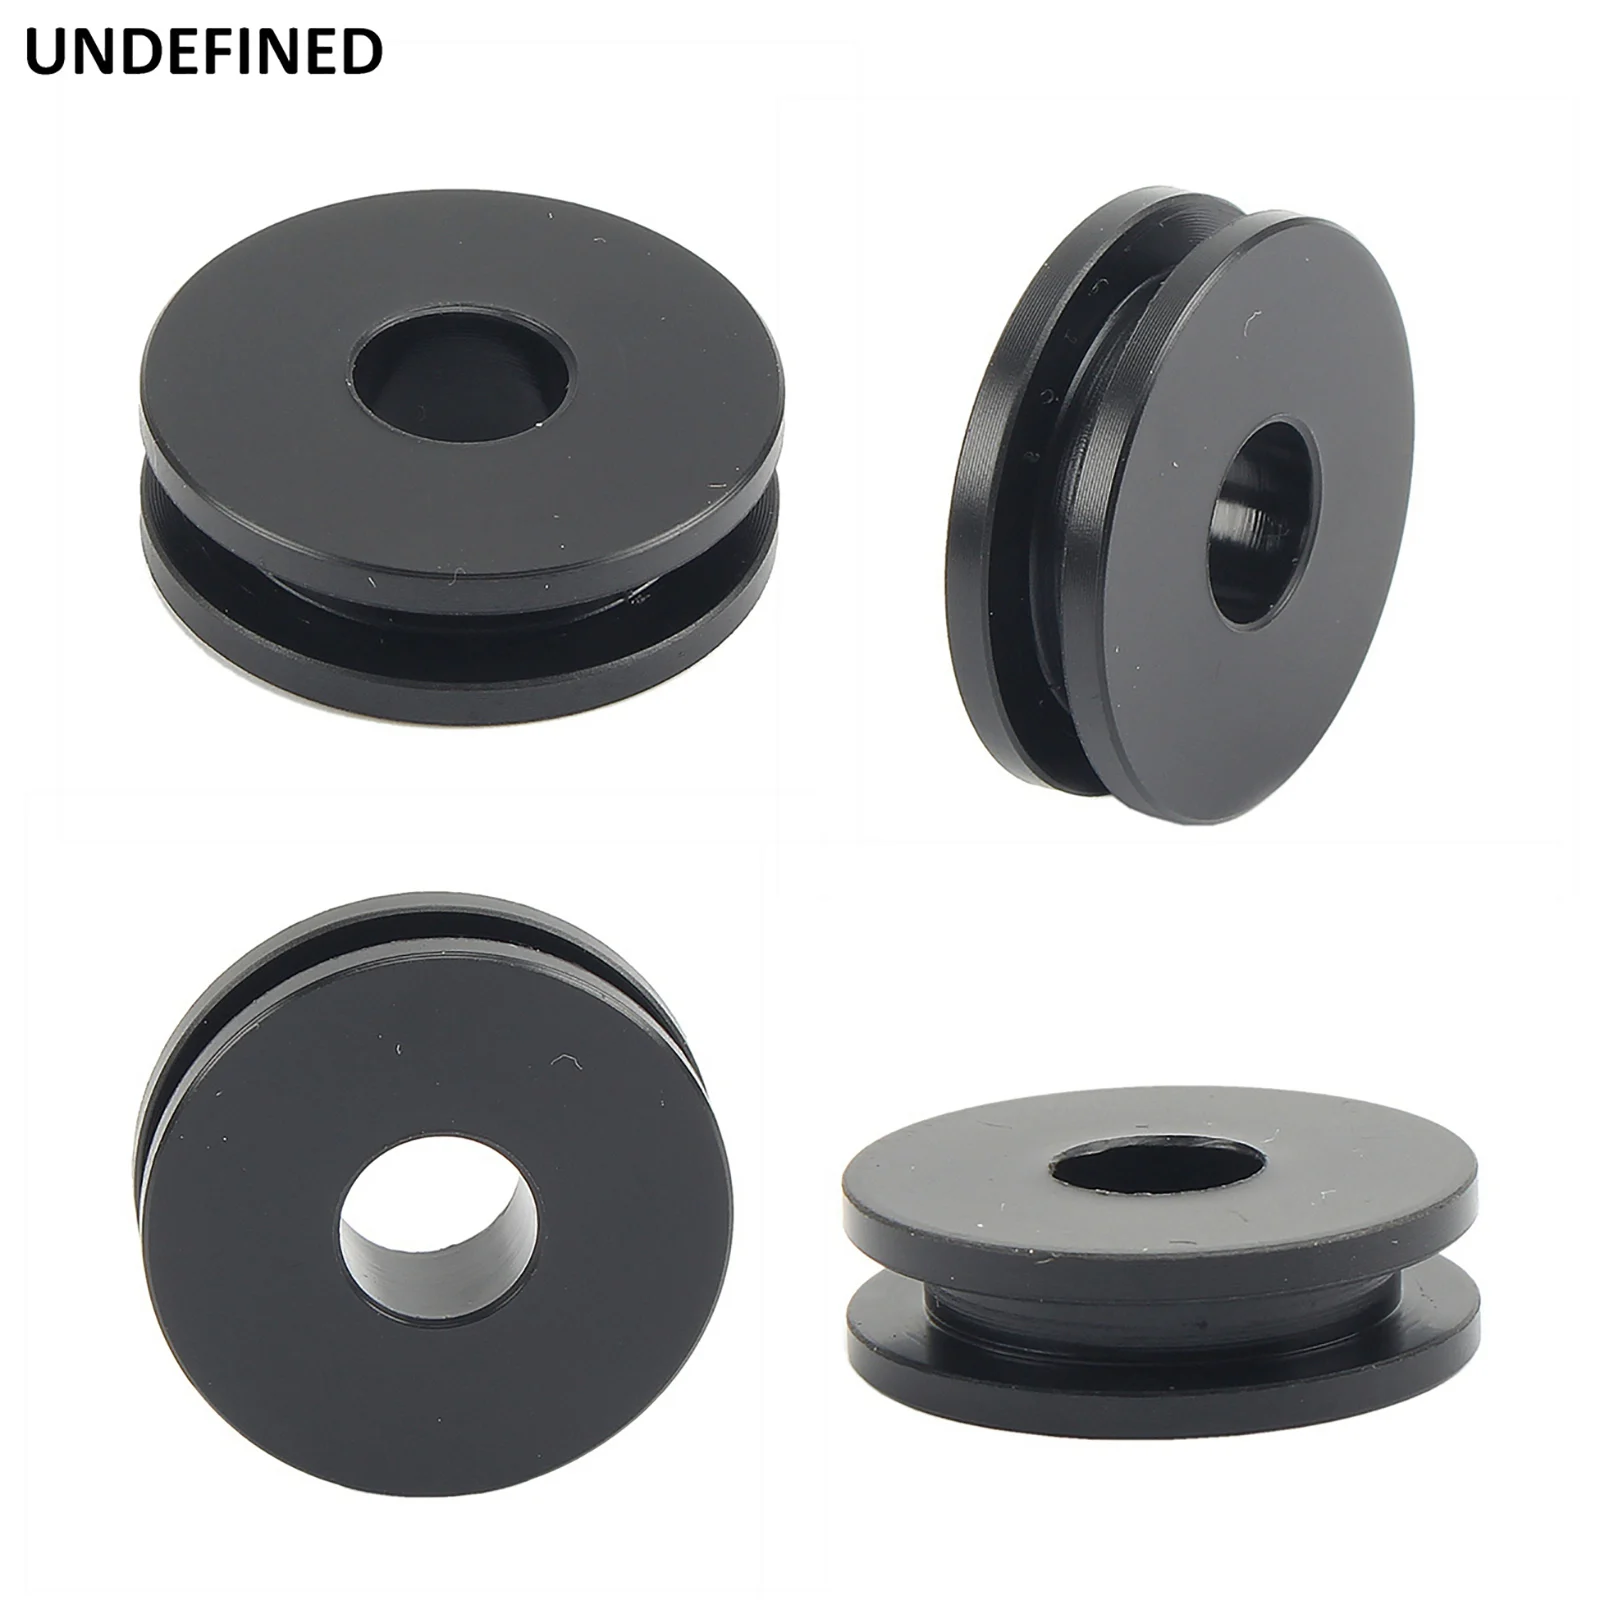 

4pcs Motorcycle Windshield Mounting Bushing Grommets POM Plastic Black Accessories For Harley Heritage Softail FLSTC Road King